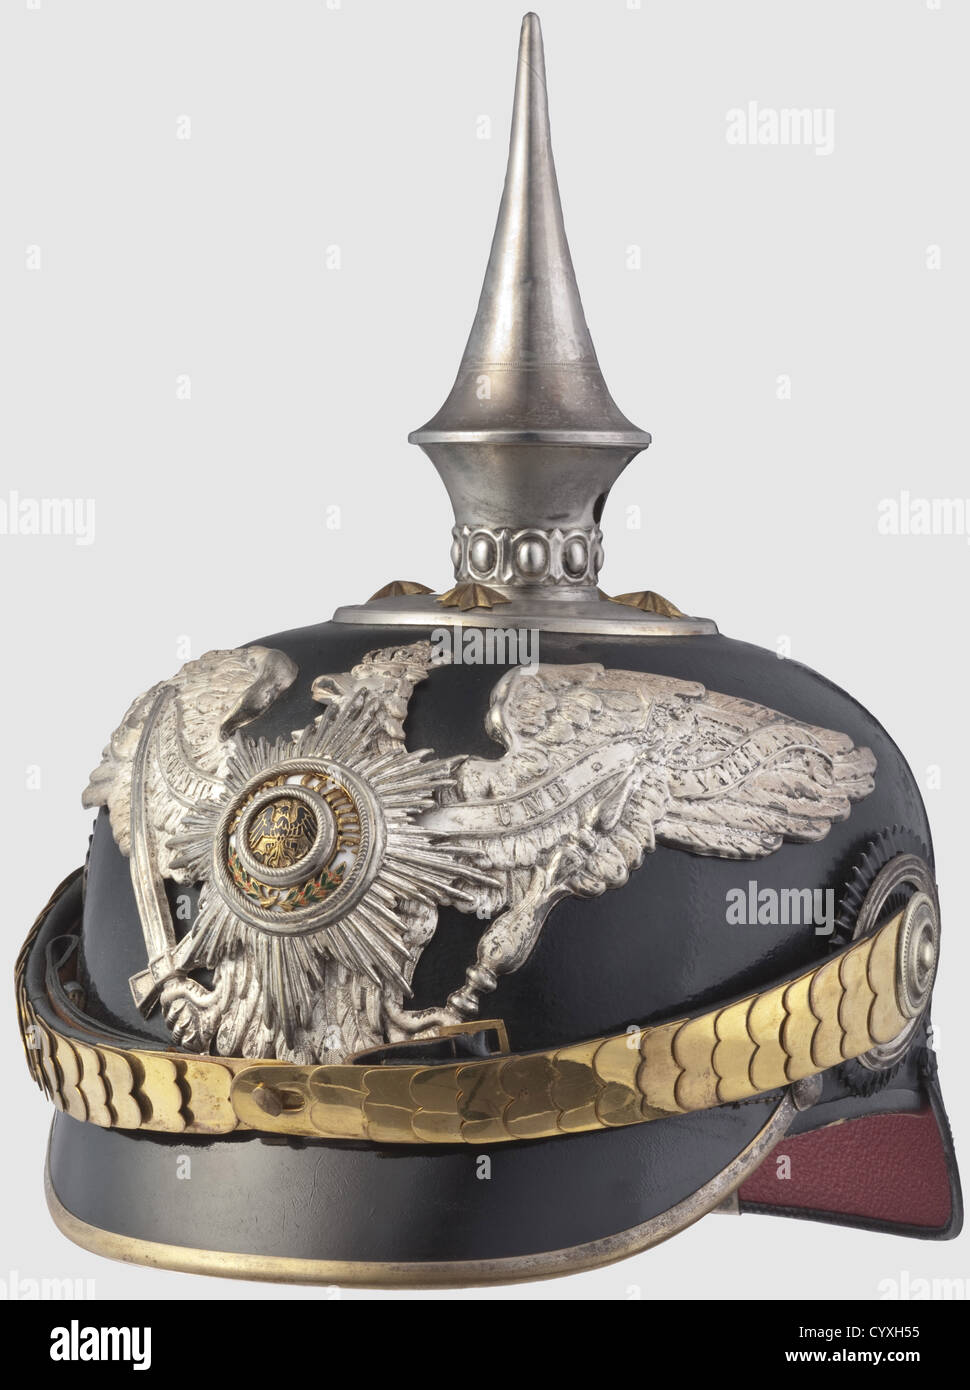 A helmet for officers,of the Prussian Guard Pioneer Batallion Black leather skull,enamelled Prussian Guard Star on a frosted silver eagle emblem,silvered spike and four officerïs stars on the base plate,flat gilt chin scales. Green ribbed silk liner,size '55' as well as an old pencil notation 'Garde Pioniere'. In a helmet box,lightly damaged. An extremely rare helmet in unusually good condition,historic,historical,19th century,Prussian,Prussia,German,Germany,militaria,military,object,objects,stills,clipping,clippings,cut out,cut-out,cut-o,Additional-Rights-Clearences-Not Available Stock Photo